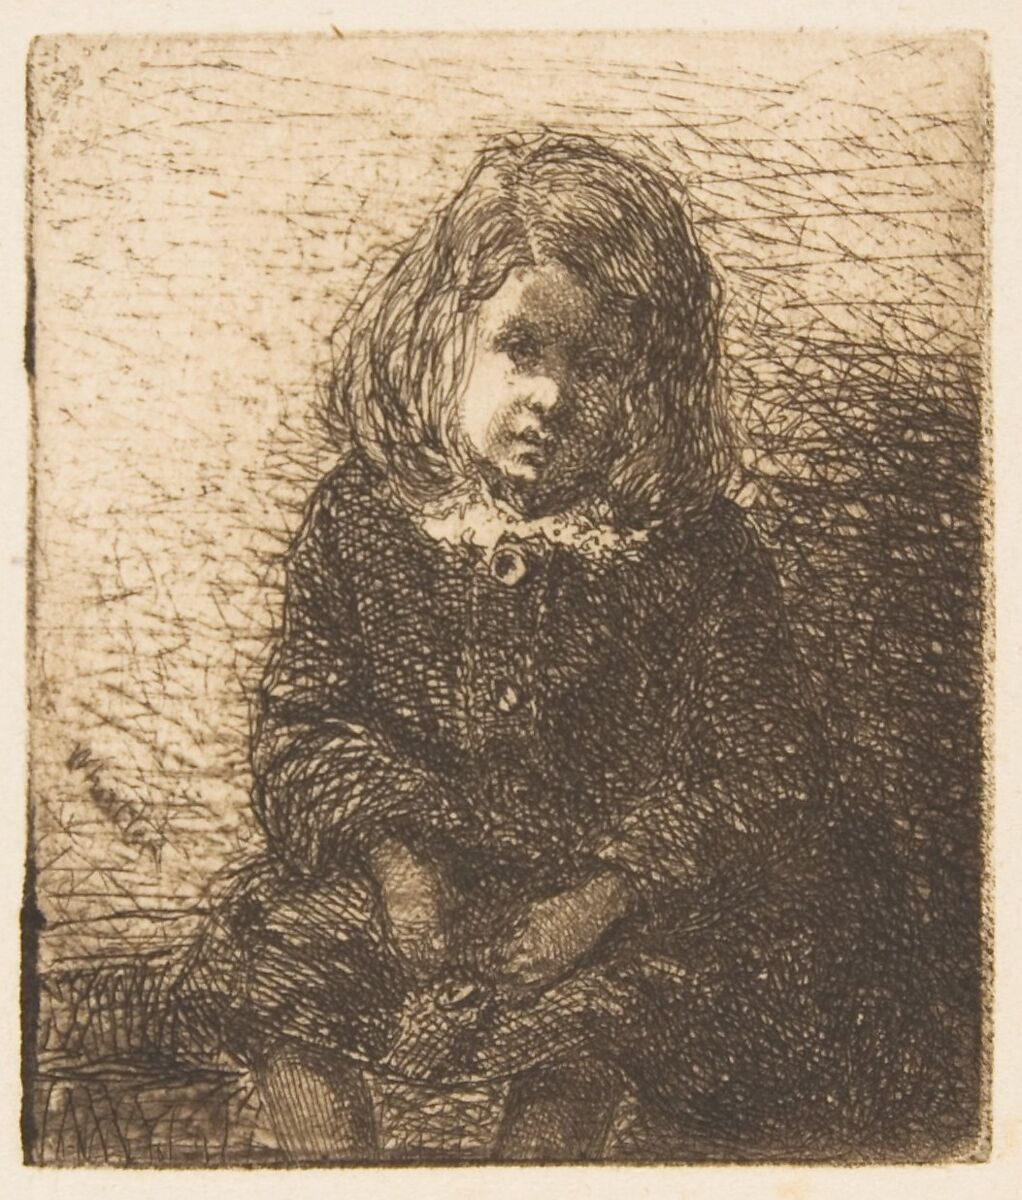 Little Arthur, James McNeill Whistler (American, Lowell, Massachusetts 1834–1903 London), Etching; fourth state of four (Glasgow); printed in dark brown ink on buff laid paper 